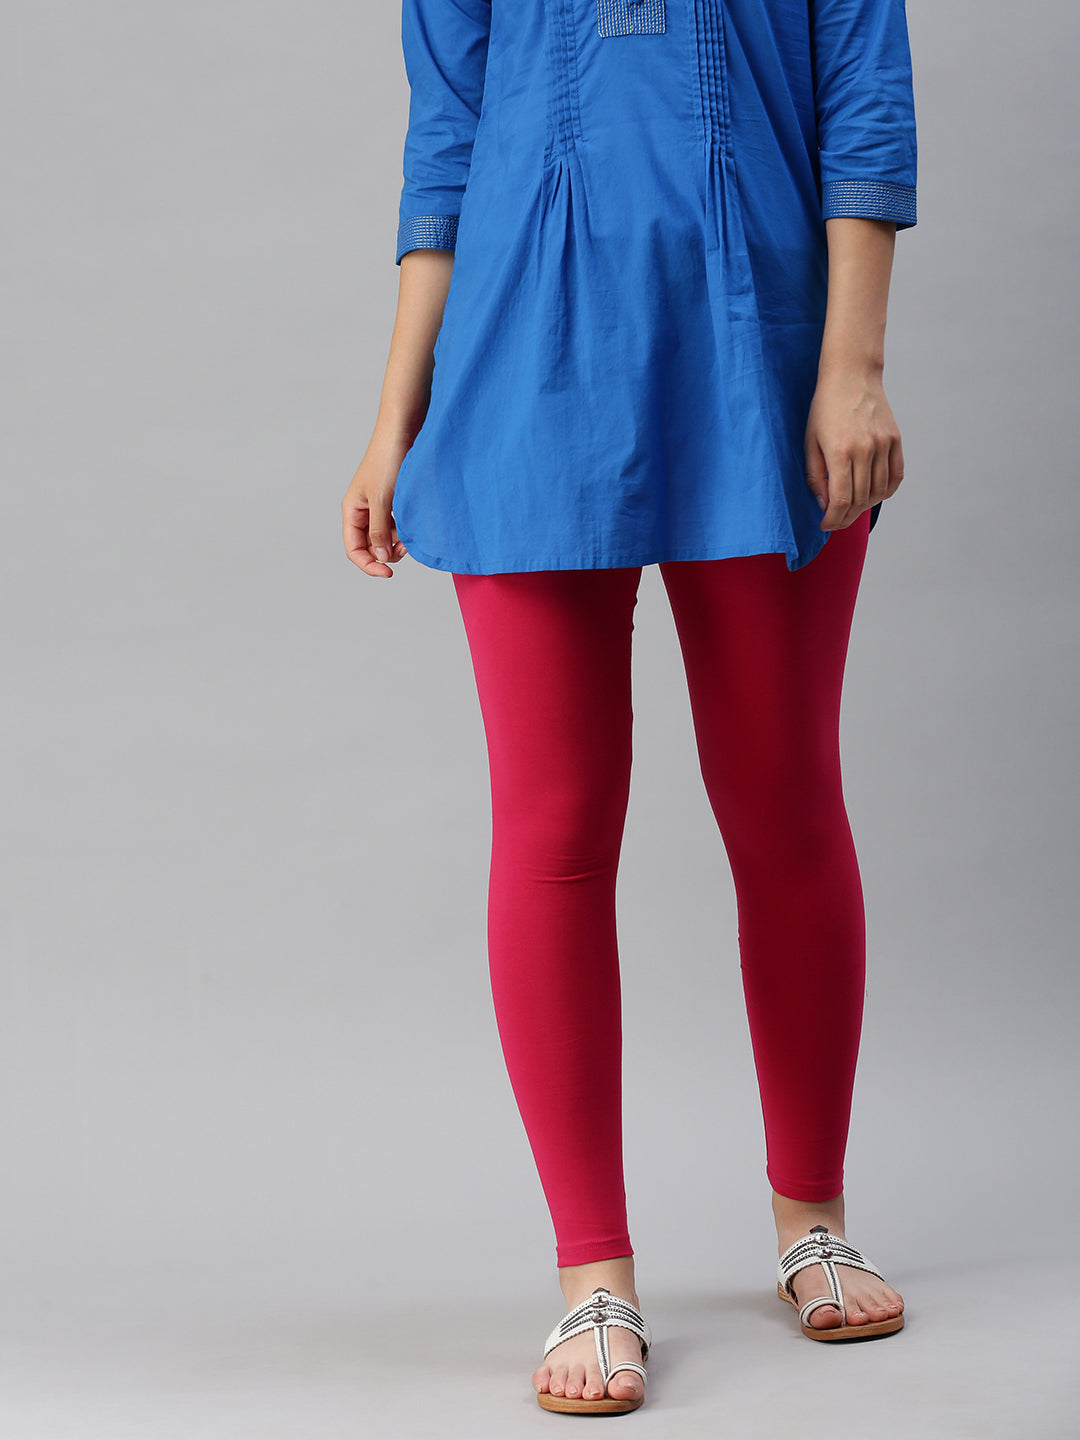 Twin Birds Xl Size Leggings - Get Best Price from Manufacturers & Suppliers  in India